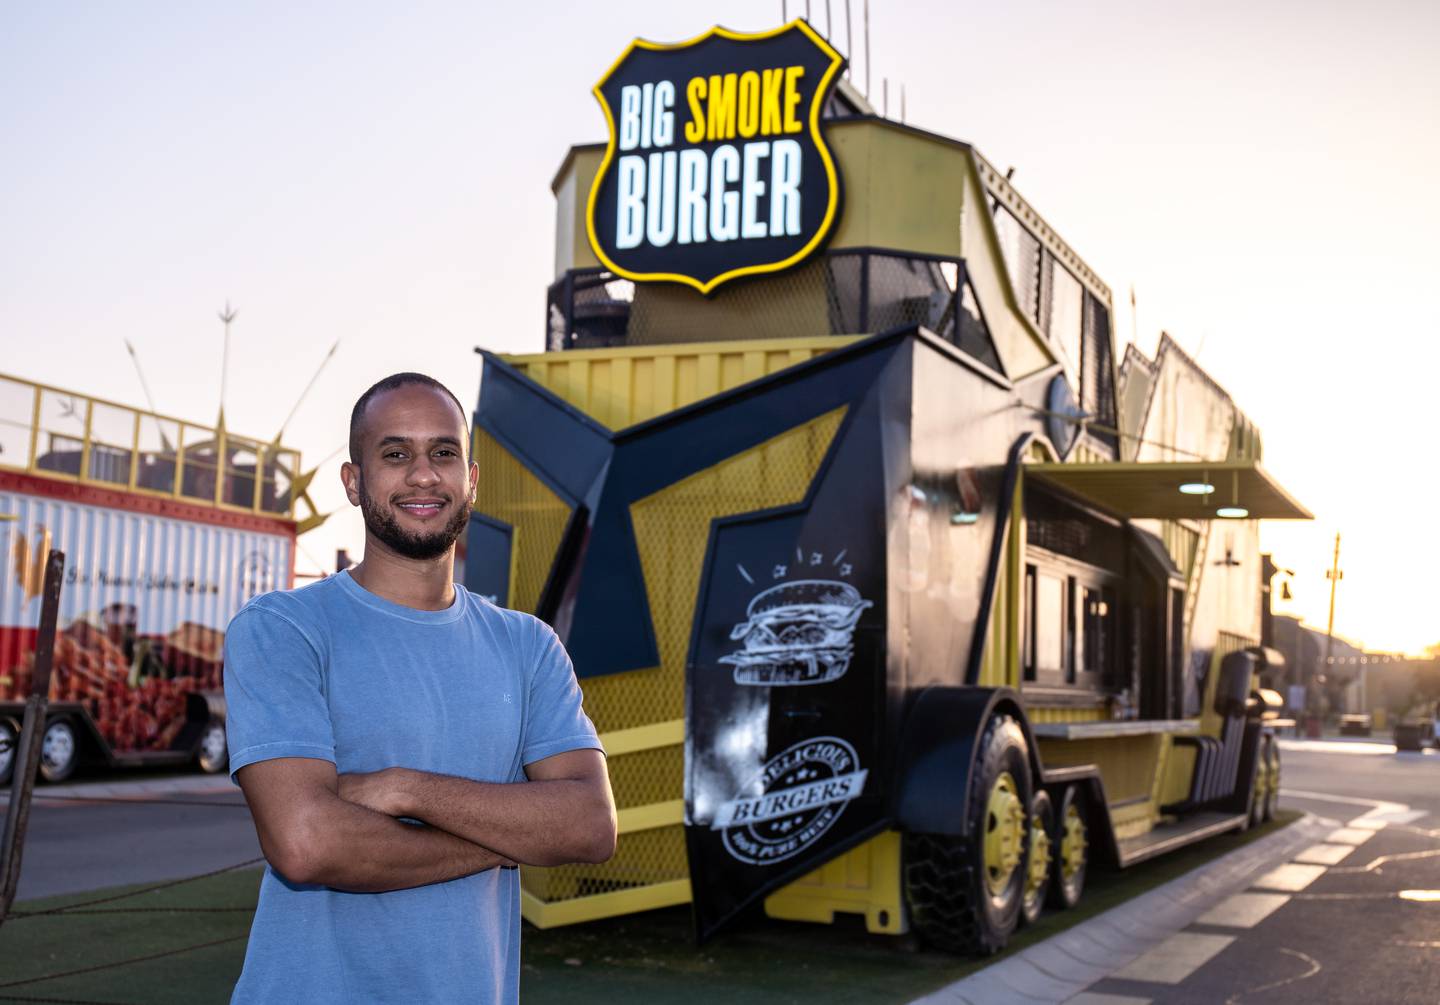 Jaret Spearman, co-owner of Big Smoke Burger located at the Last Exit. Victor Besa / The National